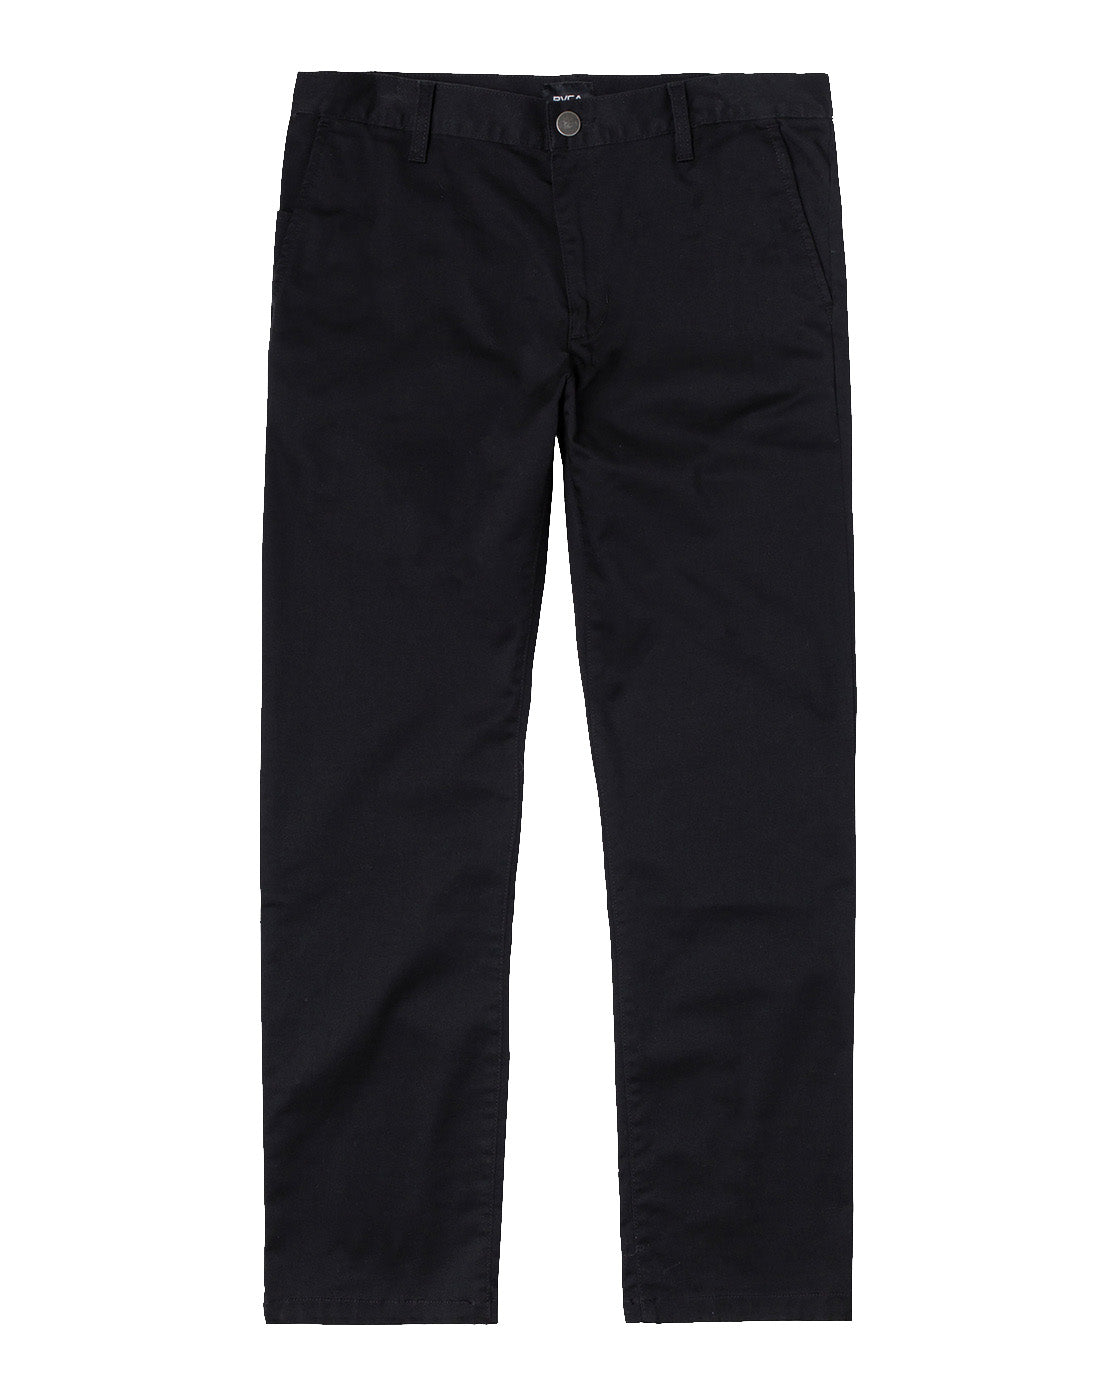 RVCA The Weekend Stretch Pant BLK 33